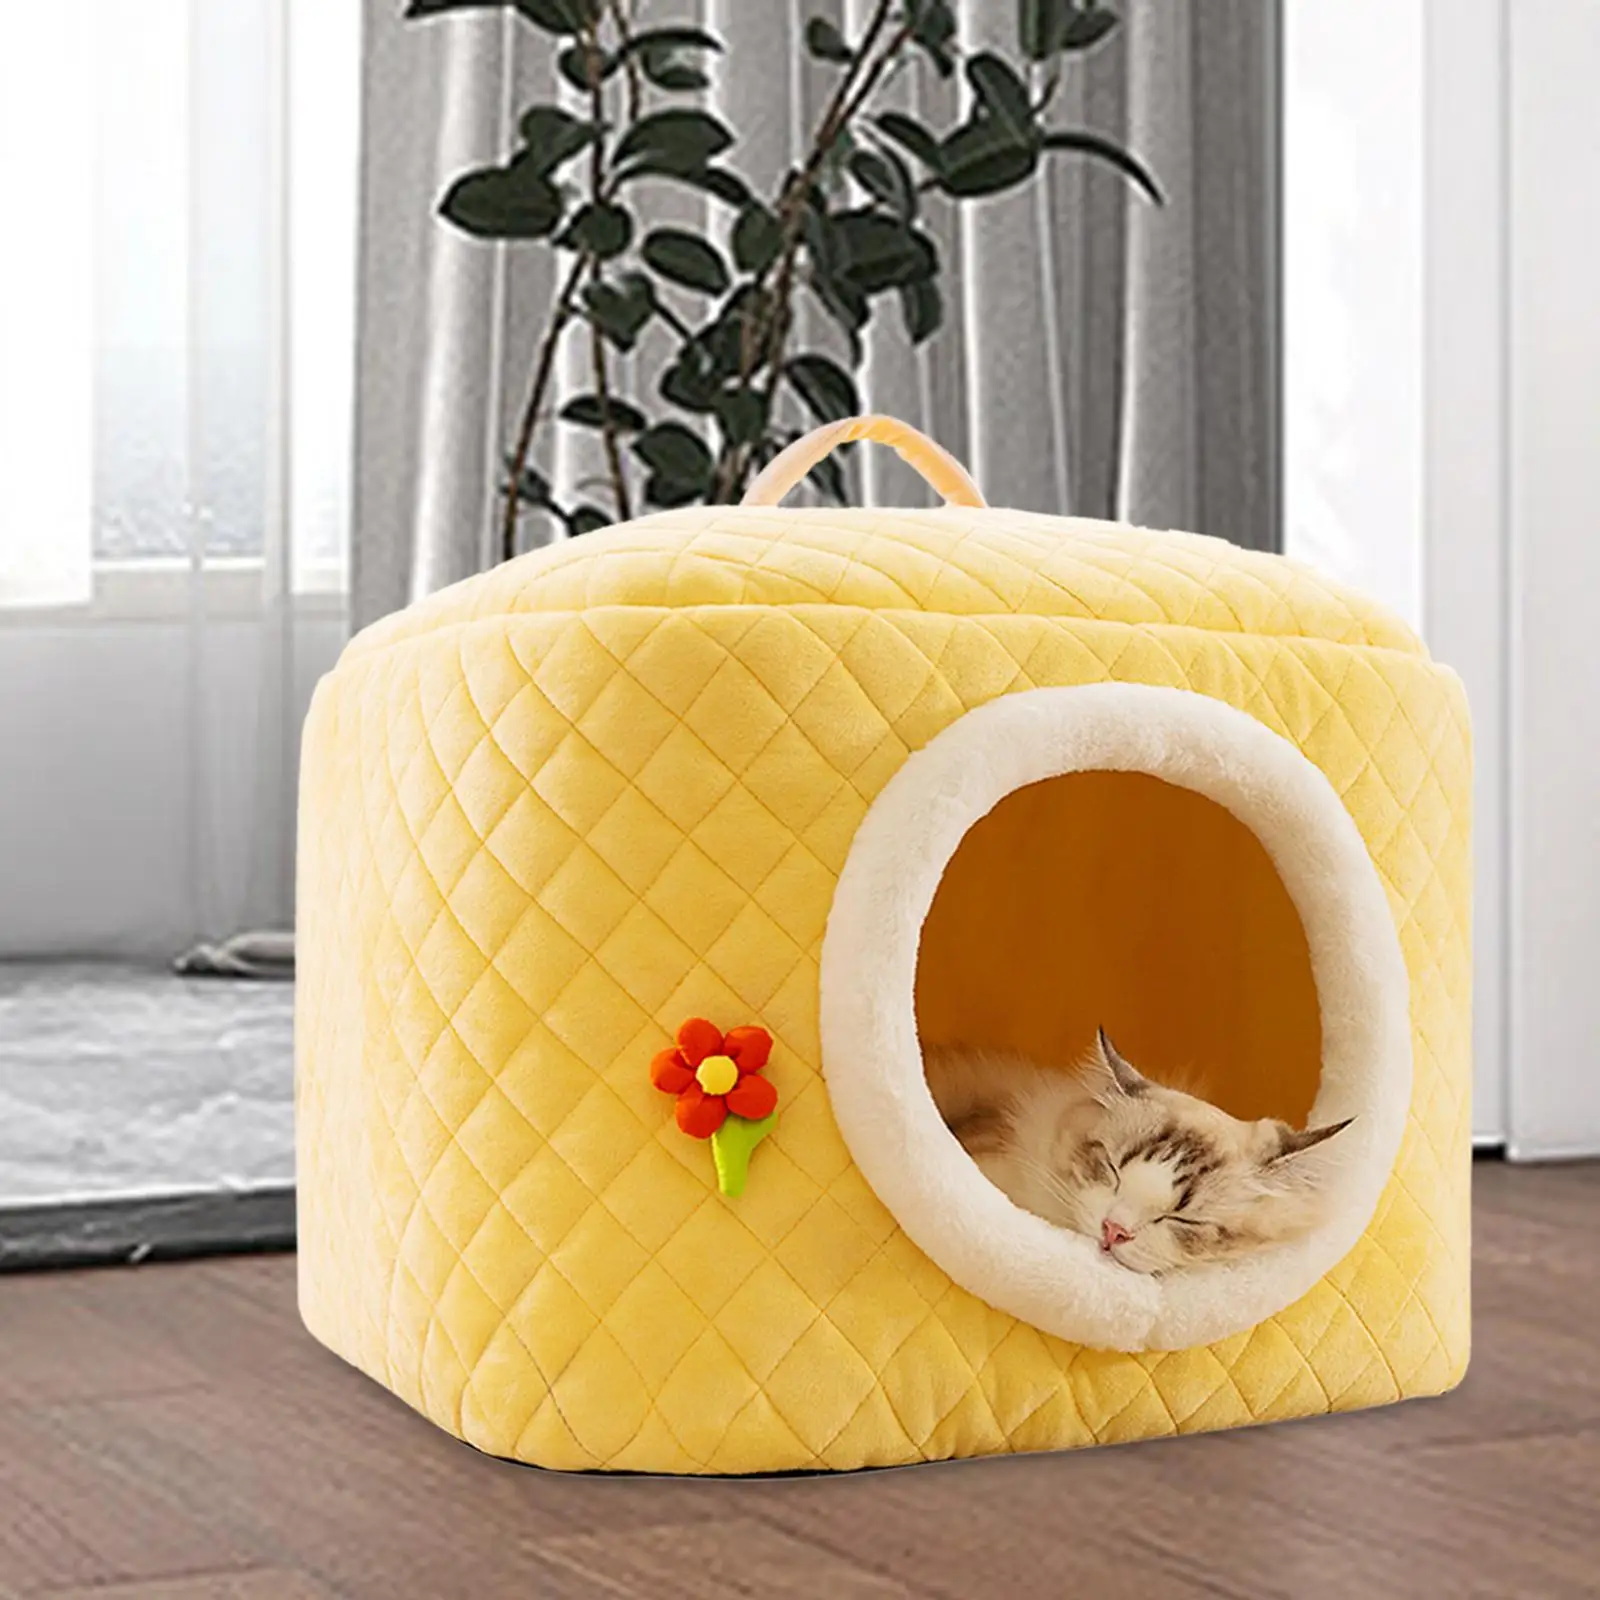 Cat Bed Cave Sleeping Soft Indoor Cats Potable with Handle Calming Cat Nest Pet Sleeping Bed Self Warming for Puppy Dog Kitten